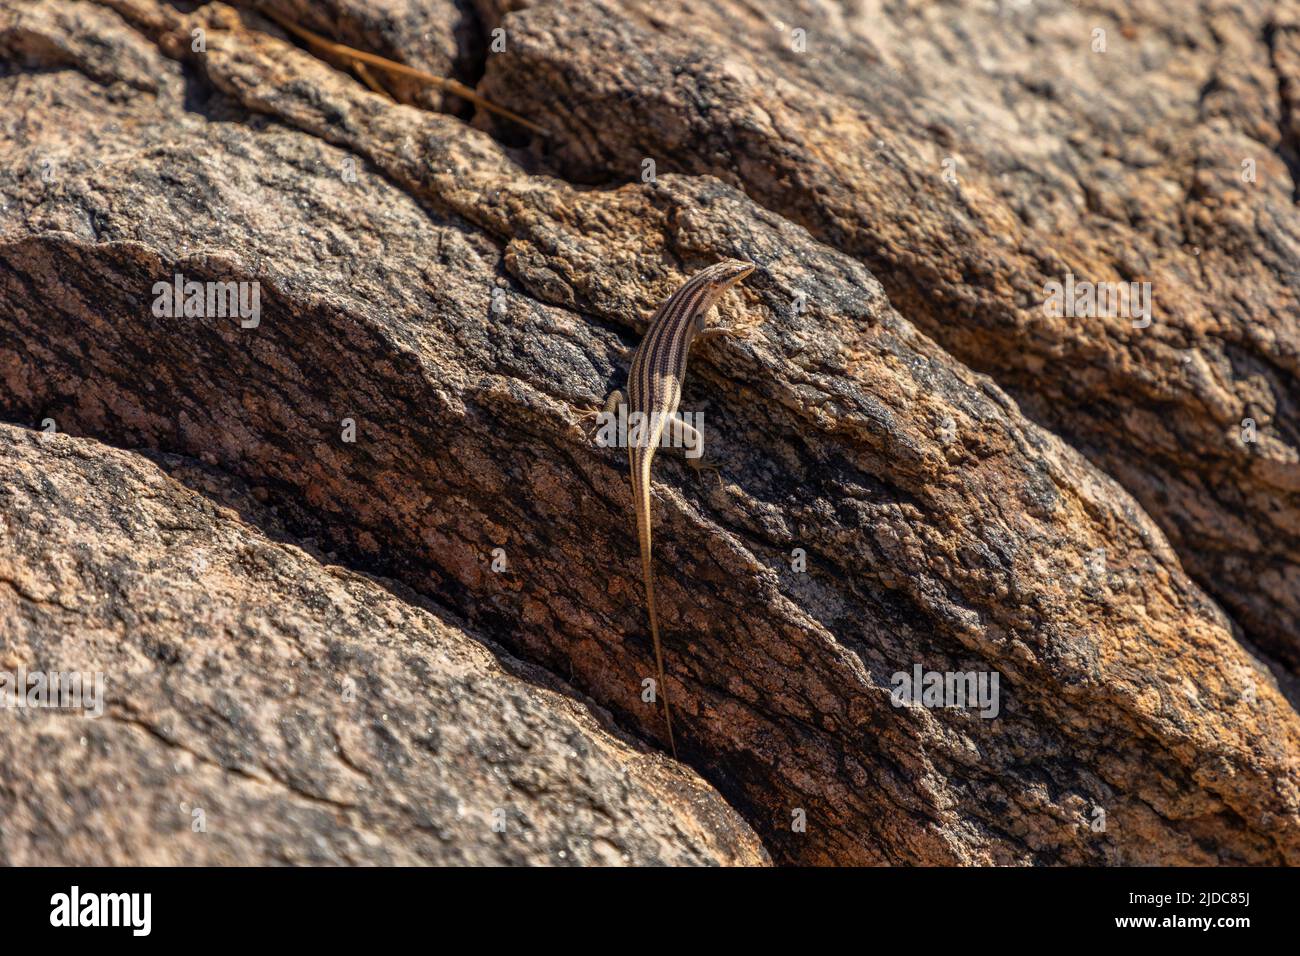 a Western Rock Skink camouflaged on a granite rock.  They are native to the western parts of Southern Africa. Scientific name is Mabuya sulcata Stock Photo